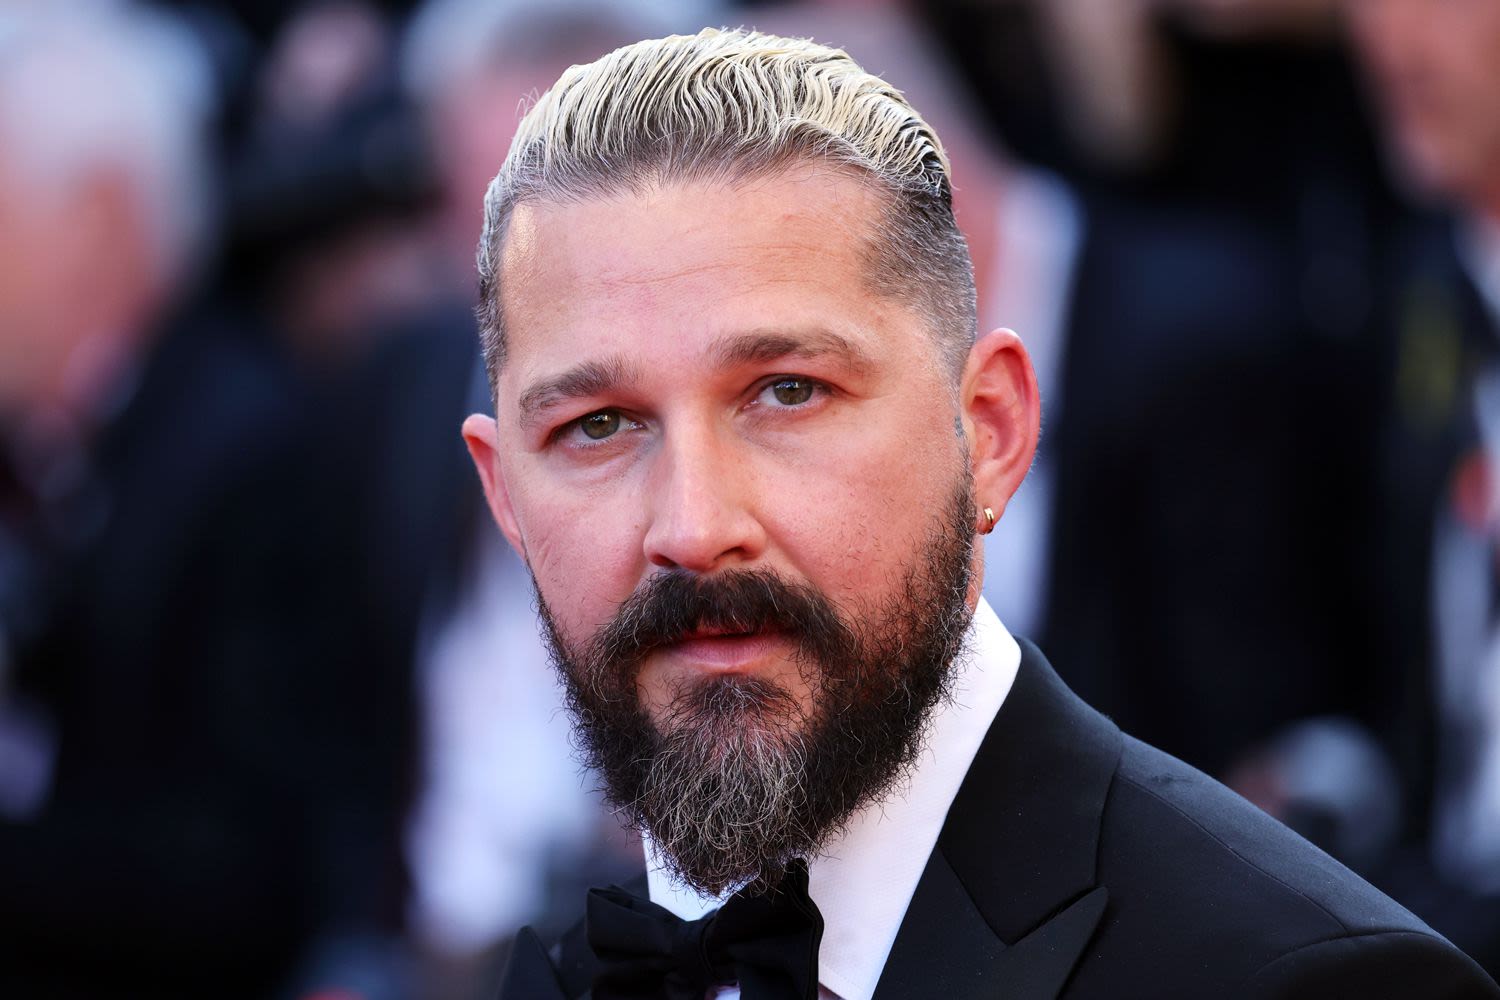 Shia LaBeouf Returns to Red Carpet in Rare Appearance at Cannes Film Festival for 'Megalopolis'